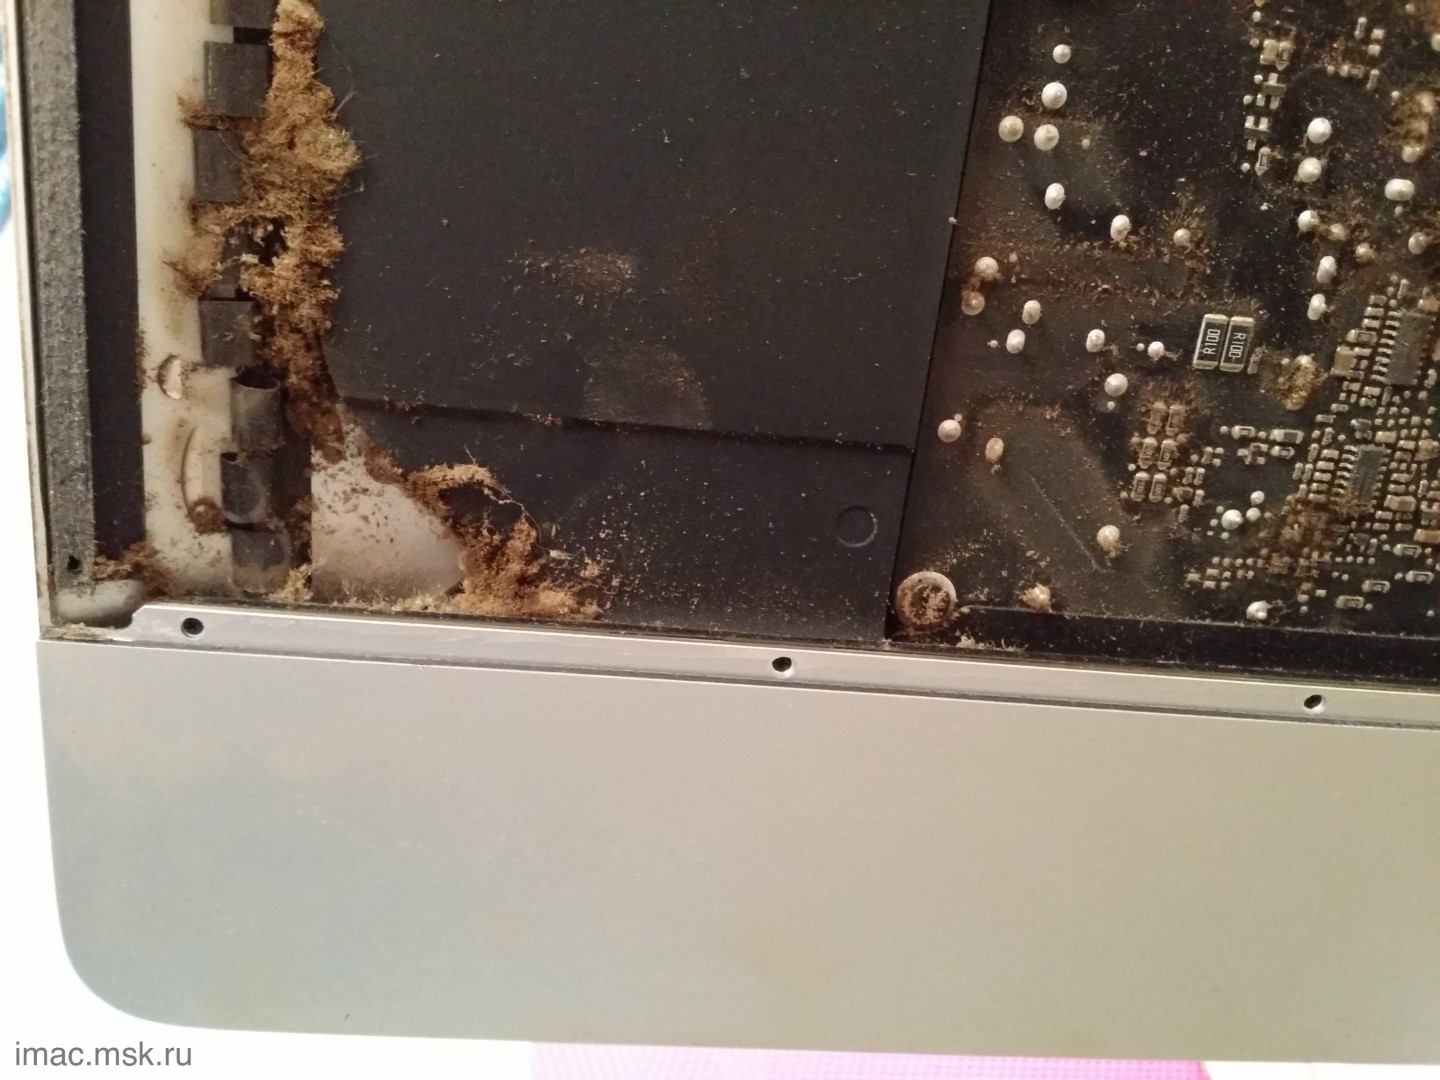 imac dust cleaning